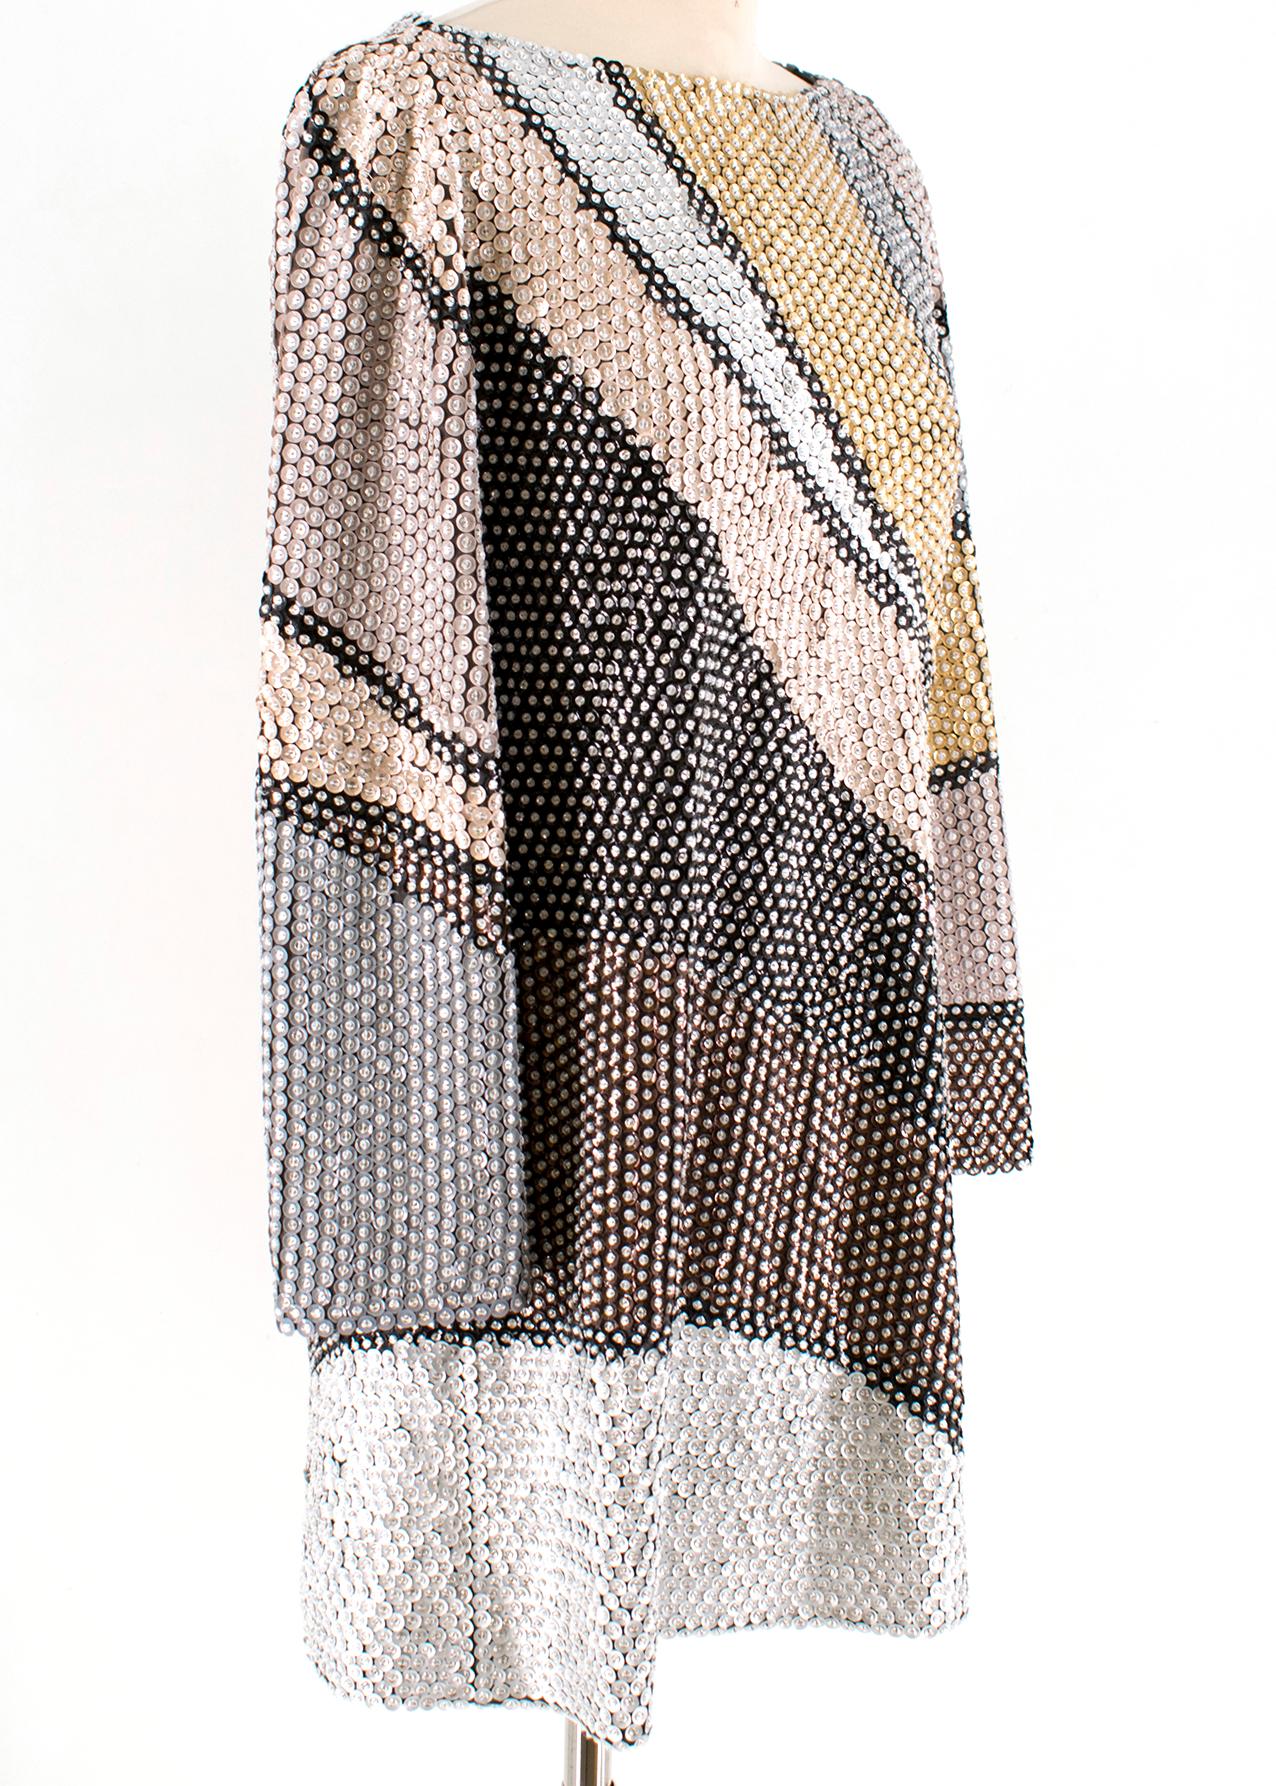 Marc Jacobs Sequin Studded Shift Dress 

Multicolour pattern sequin dress
Gold, brown, silver and black diagonal stripe design 
Long sleeves
Wide crew neck 
Brown interior lining 
Hidden zip fastening at the back centre of dress 
Loose fit 
Straight